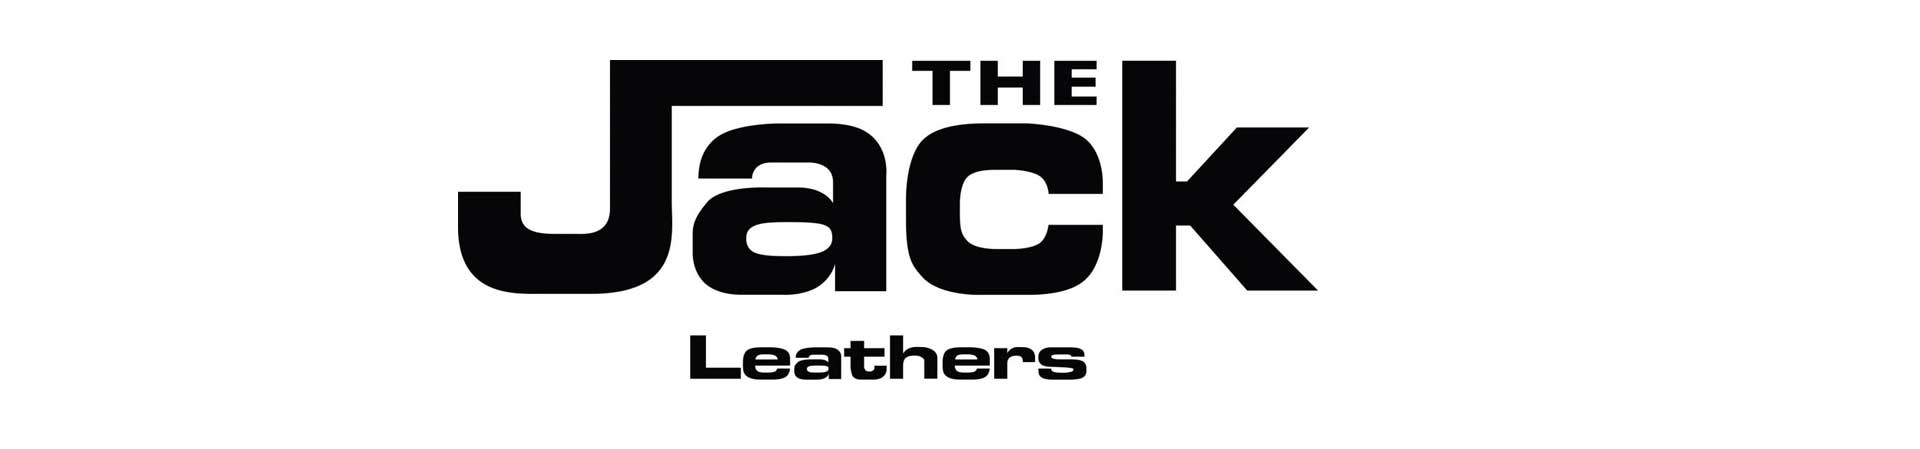 THE JACK LEATHER